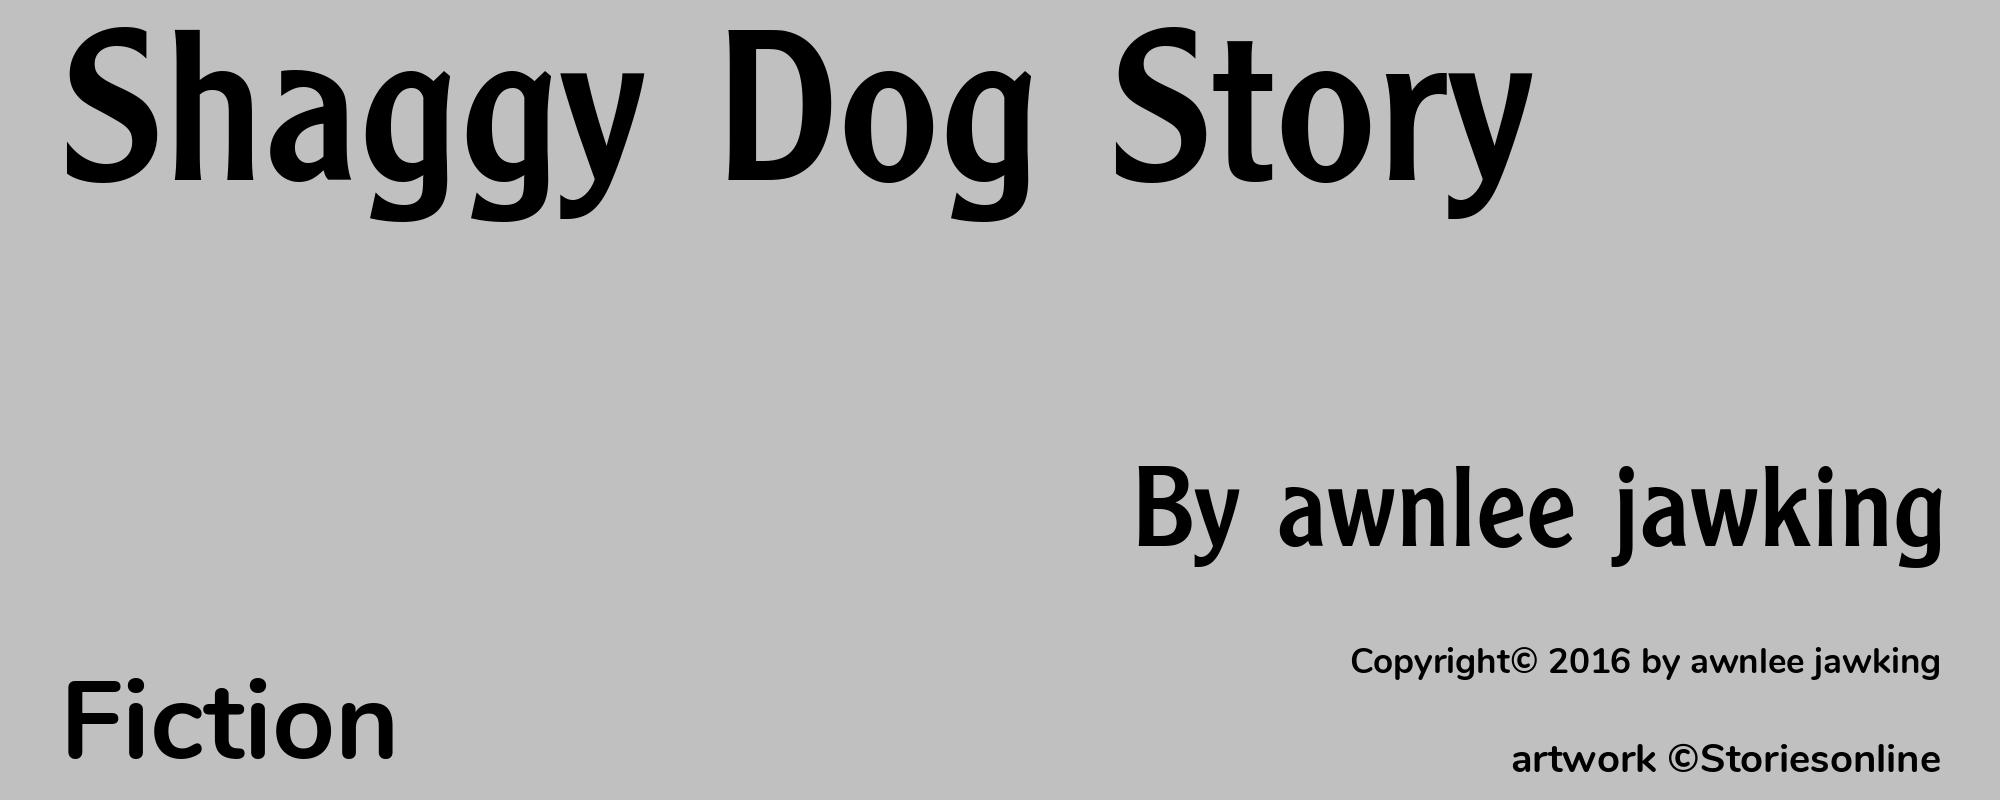 Shaggy Dog Story - Cover